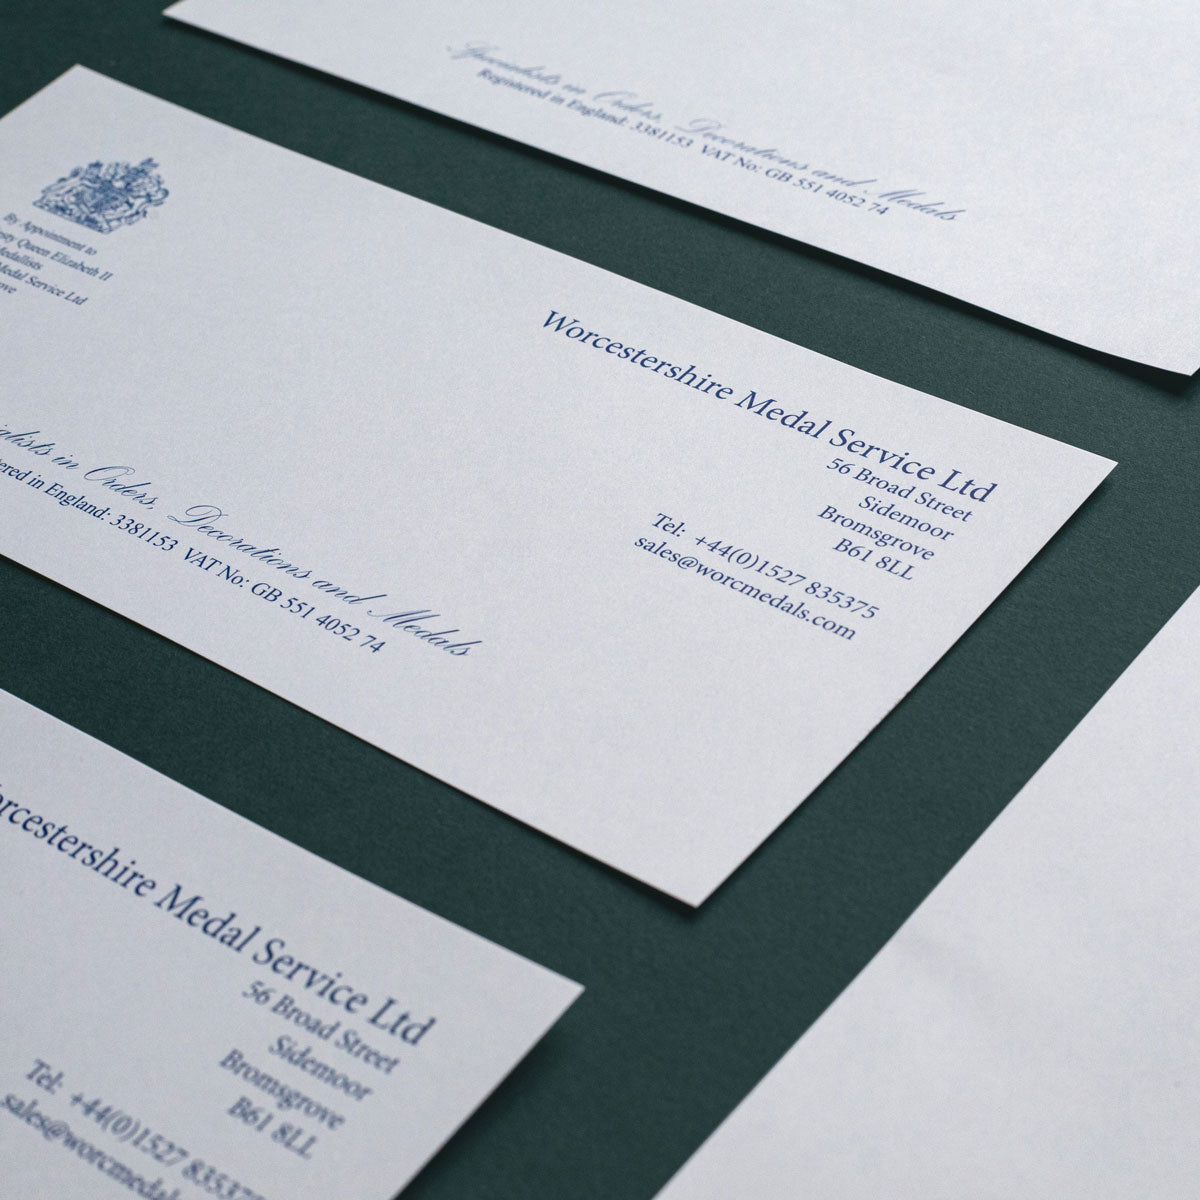 luxury compliment slip blue text printed on white paper